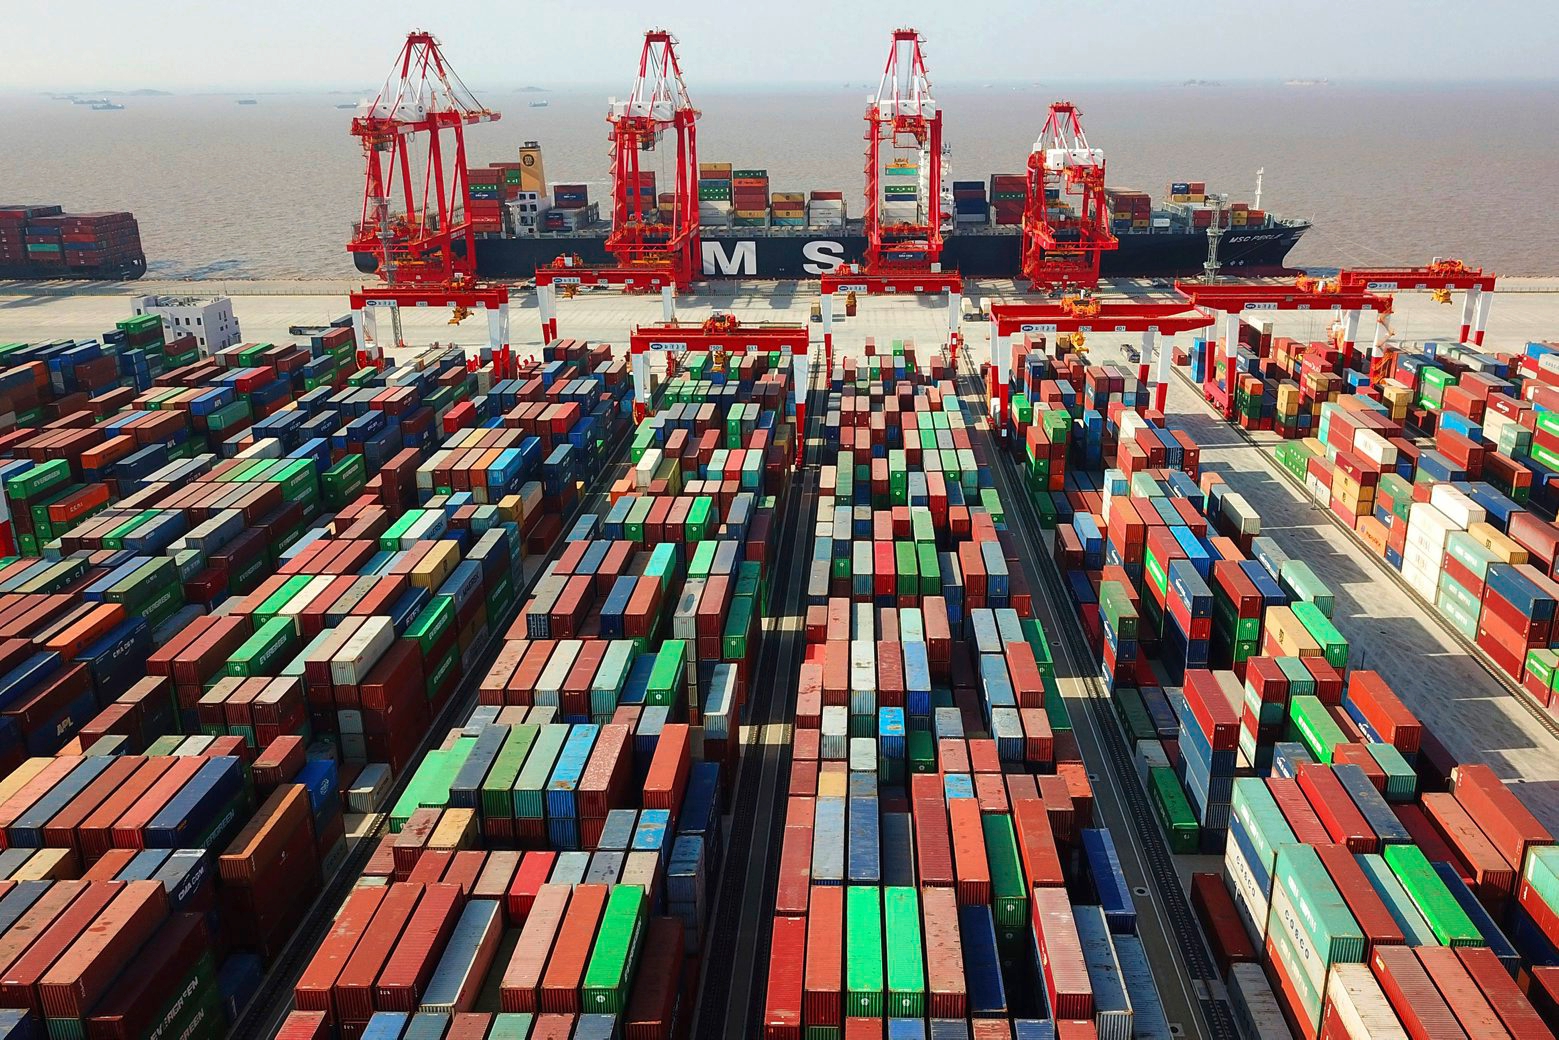 FILE - In this April 10, 2018, file photo, a cargo ship is docked at the Yangshan container port in Shanghai, China. The Asian Development Bank has slightly downgraded its growth forecasts in its latest outlook report for the region, citing the fallout from trade tensions, rising debt and the potential impact from tightening of credit in the U.S. (Chinatopix via AP, File) Asia Economy